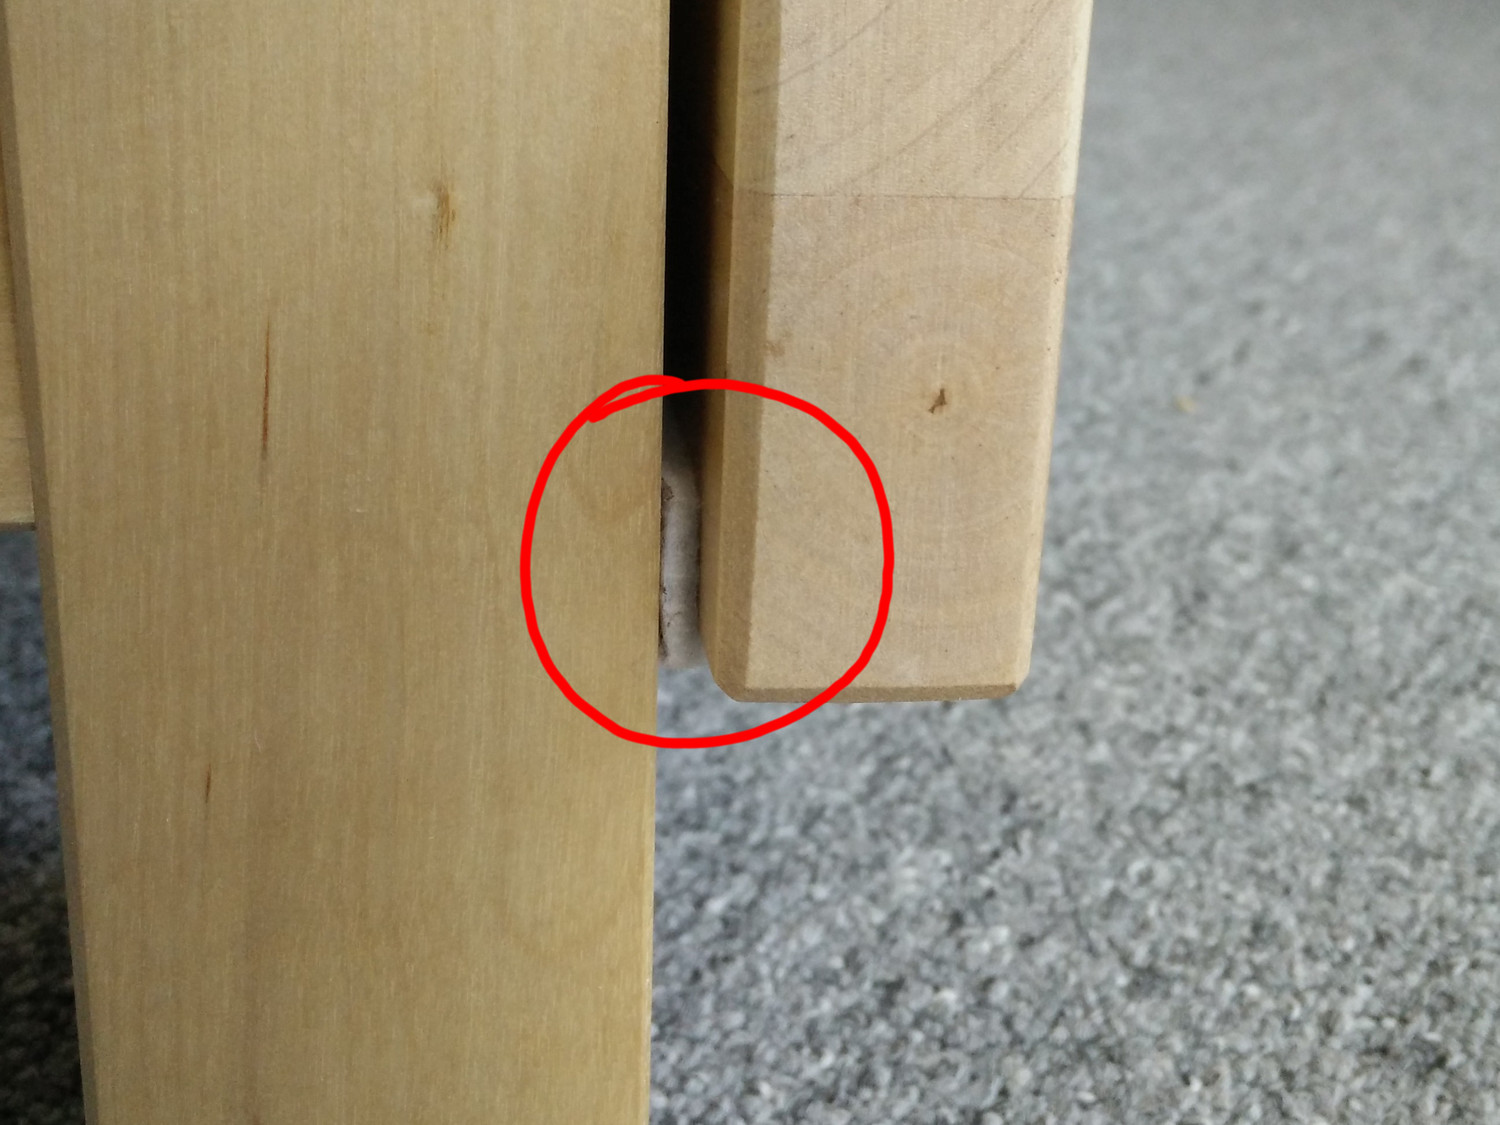 Position of the felt pad when the wing is closed